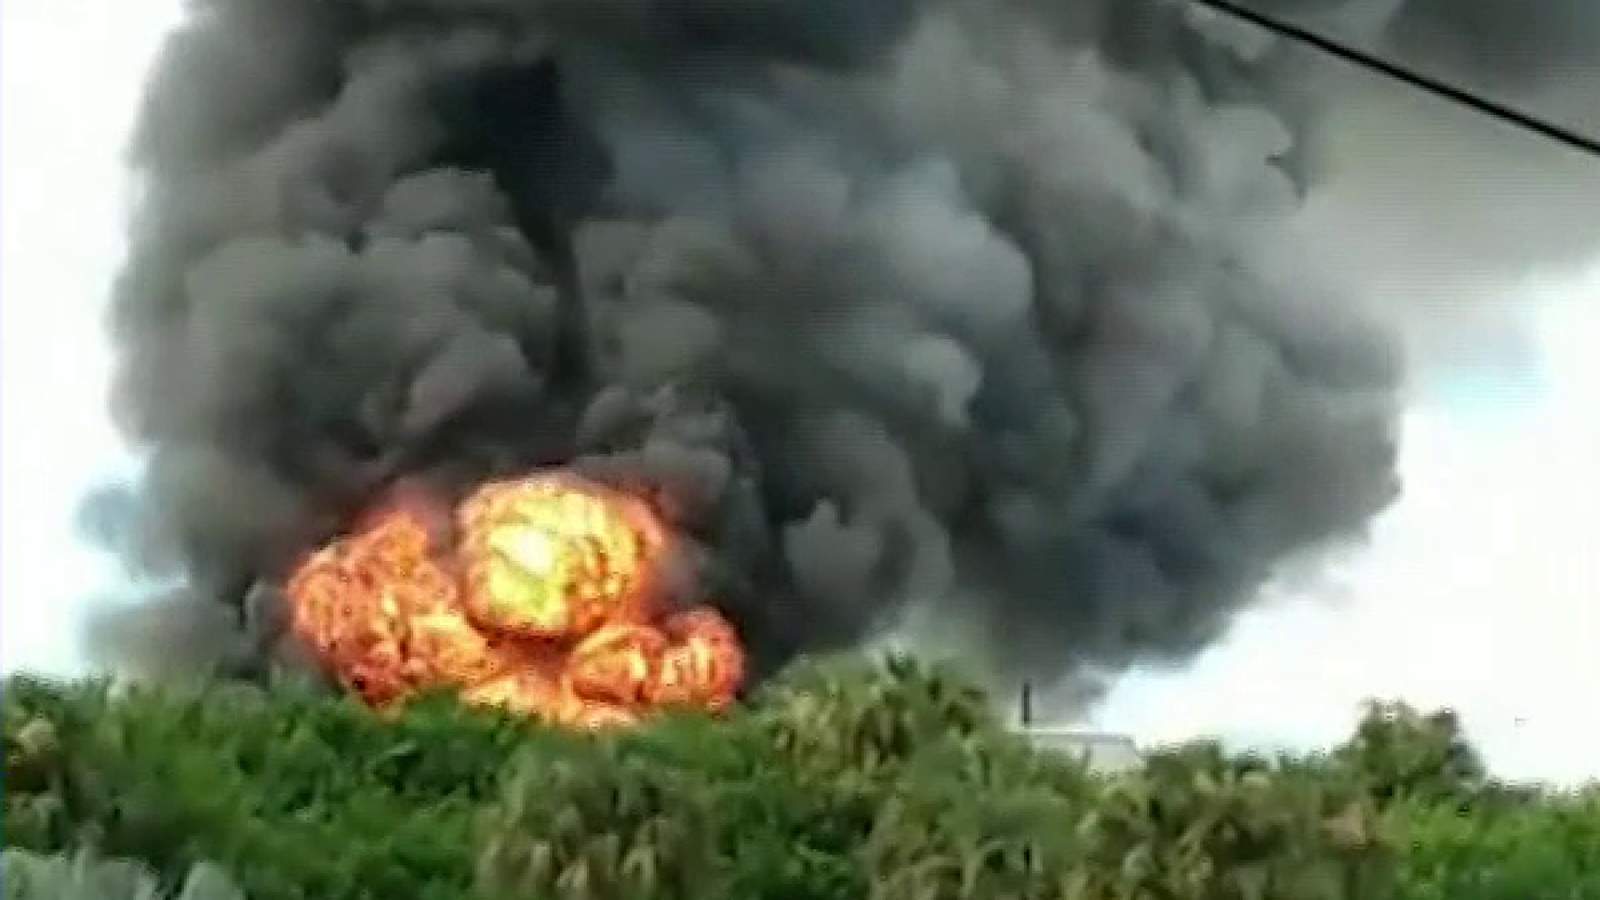 FAR Chemical warned Palm Bay officials of hazards months before explosion